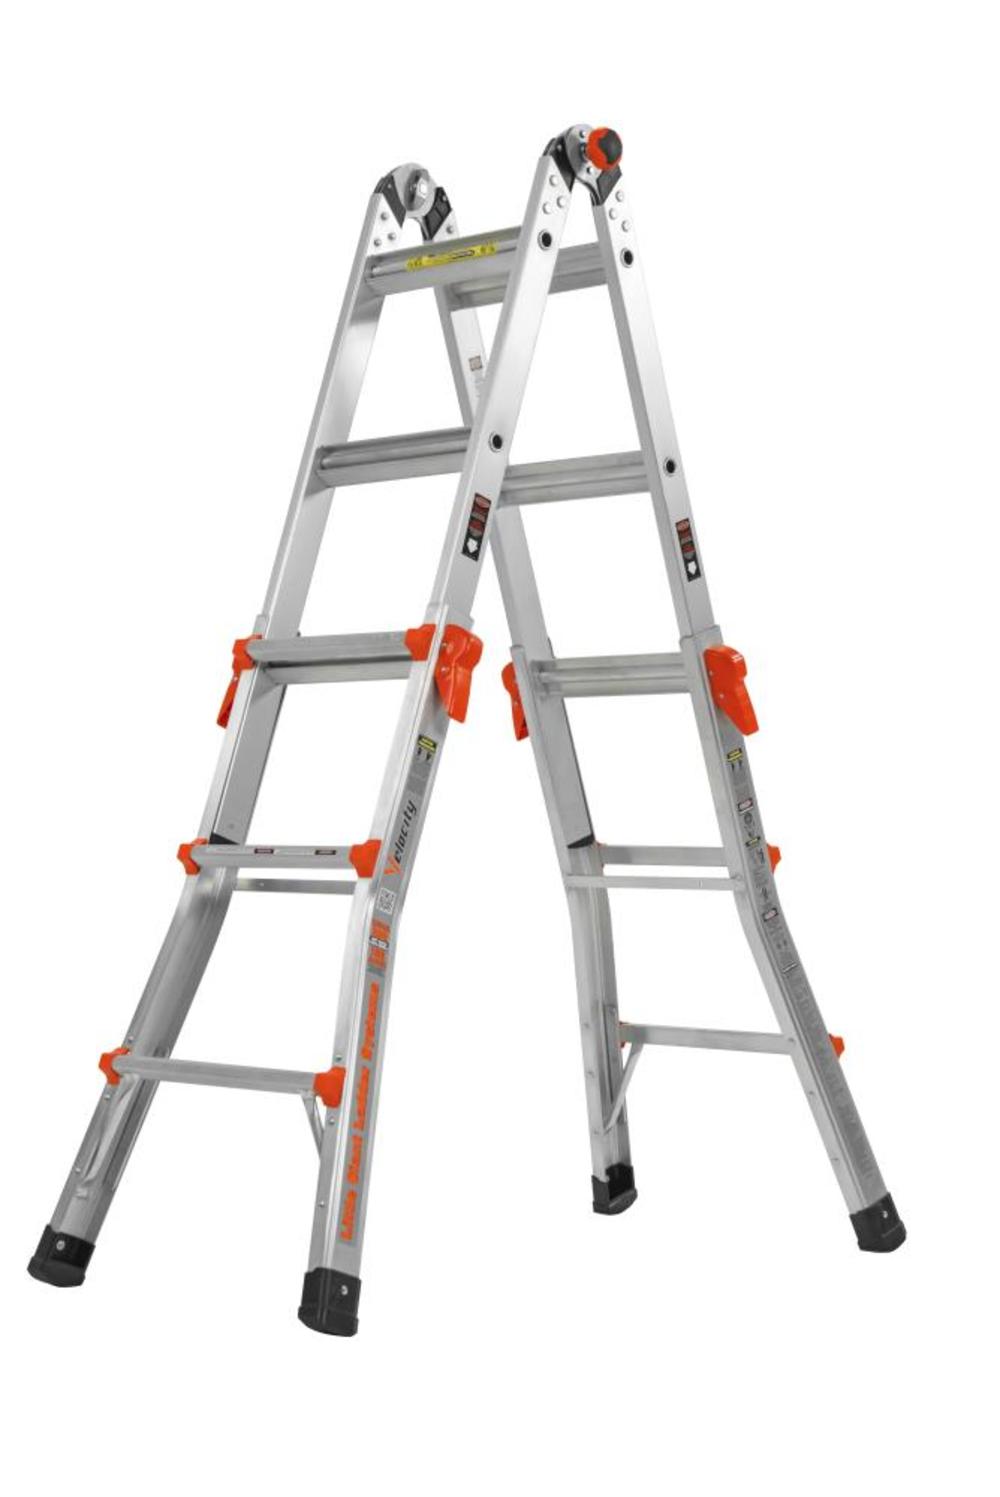 13 1a Velocity Little Giant Ladder 15413-001 300lb Rating for sale online 